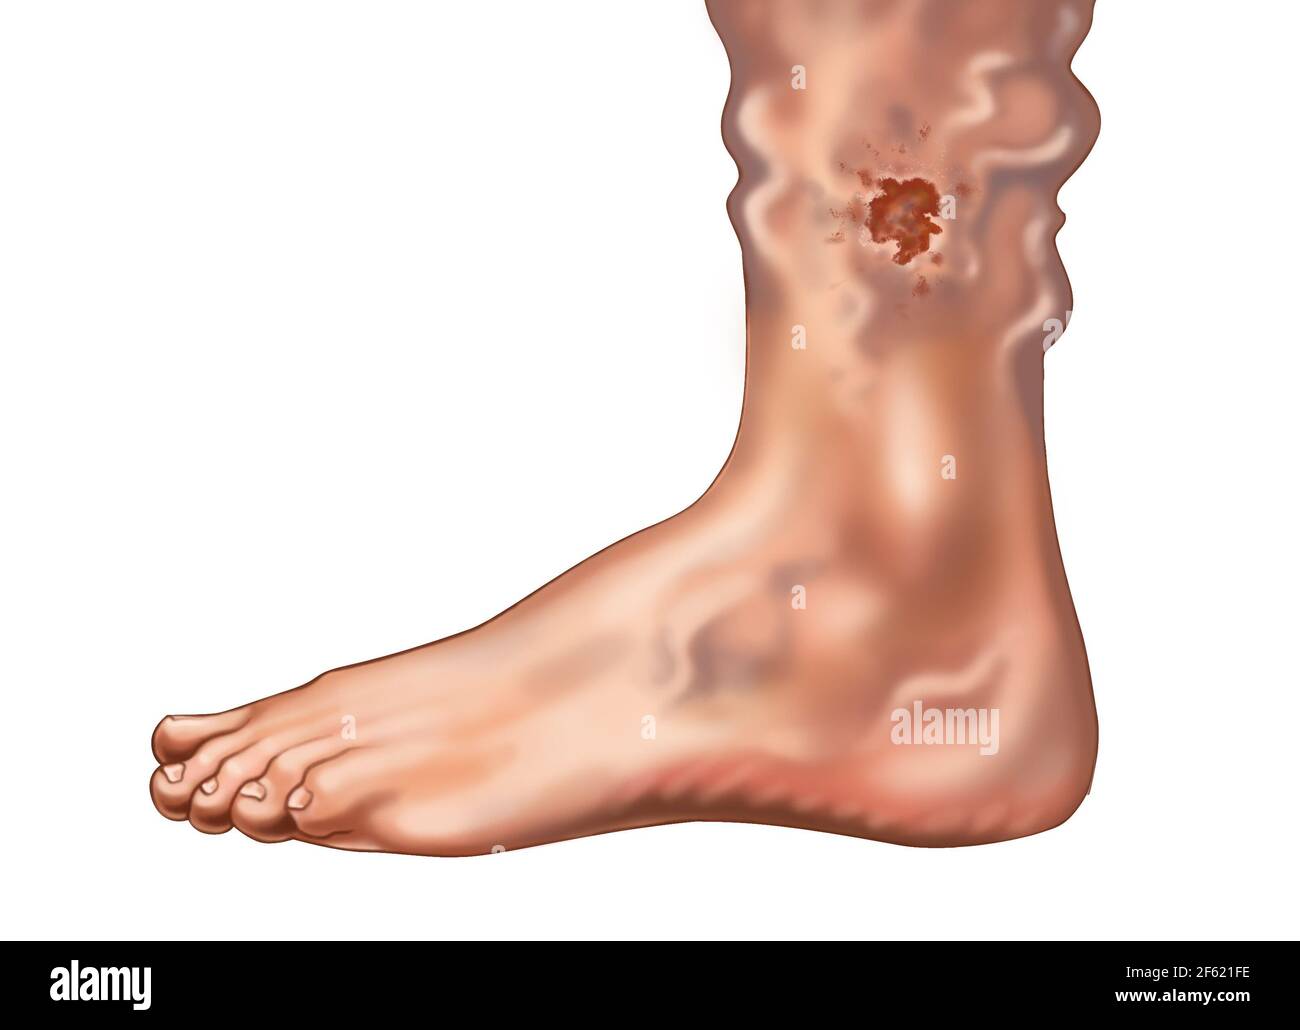 Skin Ulcer from a Varicose Vein on the Ankle Stock Photo